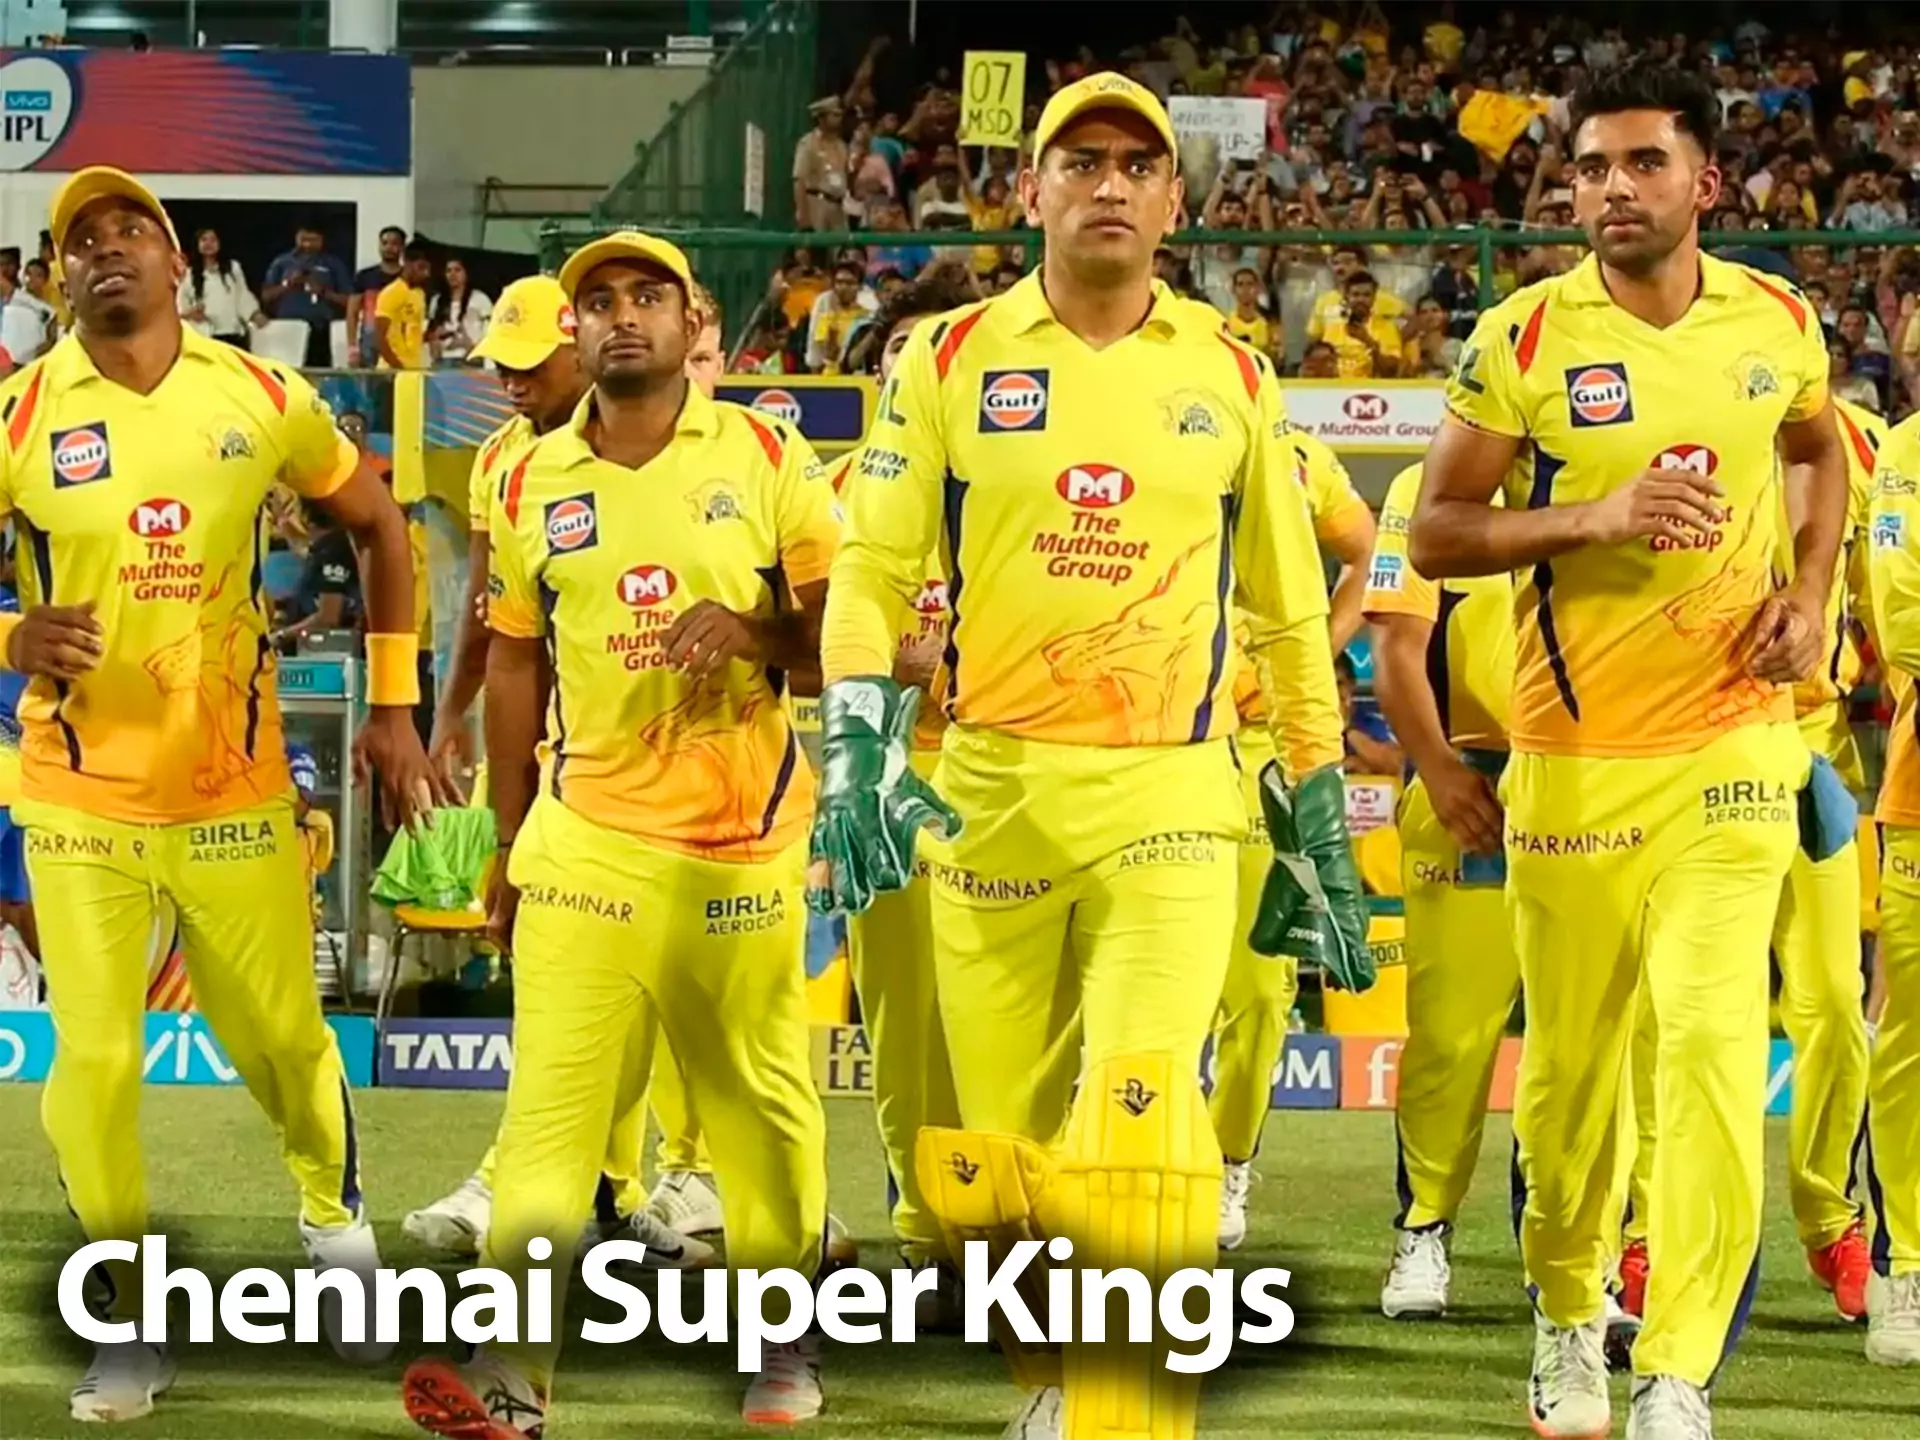 Watch the Chennap Super Kings perfomance and place bets at the best cricket betting sites.